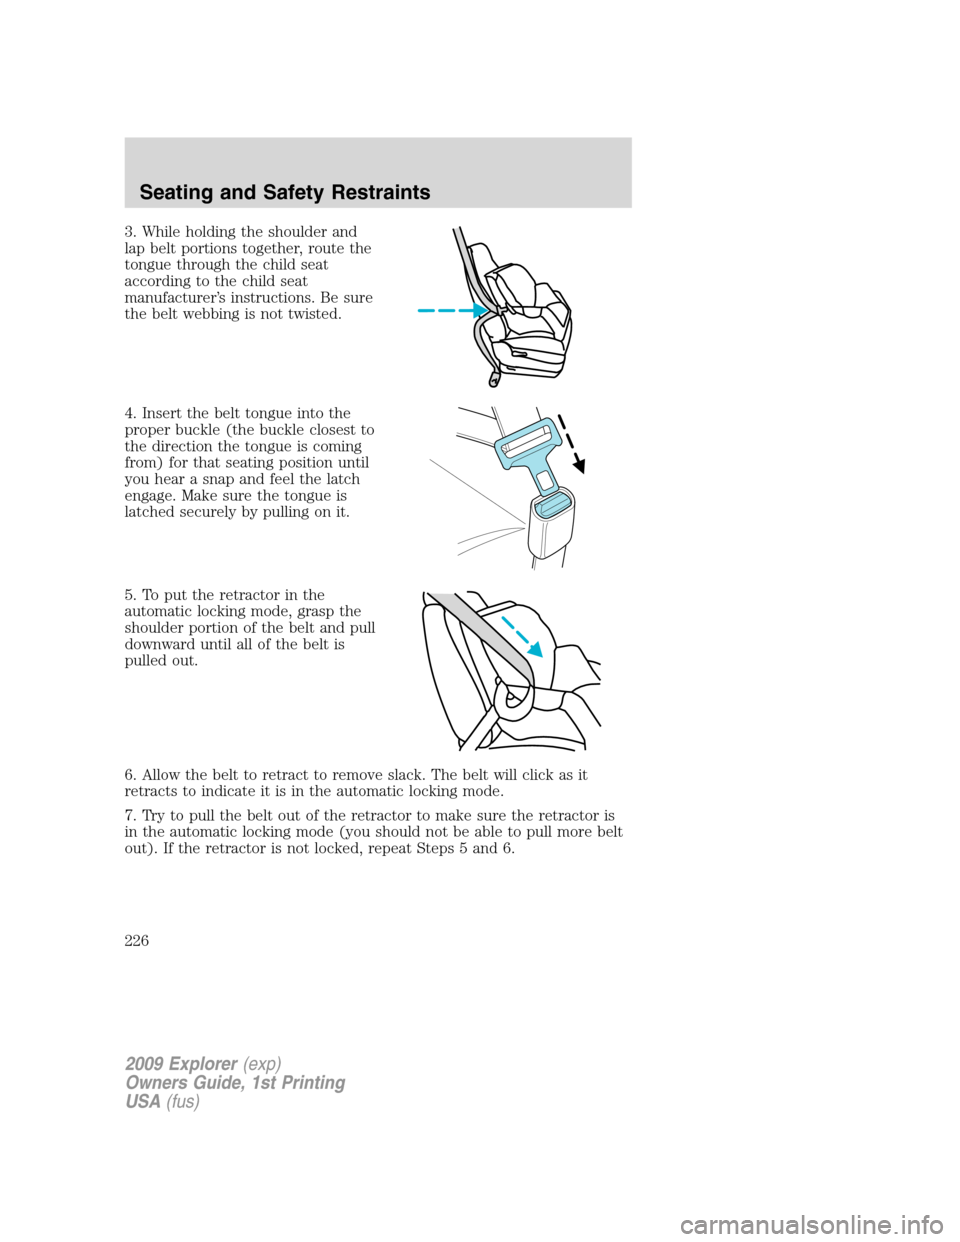 FORD EXPLORER 2009 4.G Owners Guide 3. While holding the shoulder and
lap belt portions together, route the
tongue through the child seat
according to the child seat
manufacturer’s instructions. Be sure
the belt webbing is not twisted